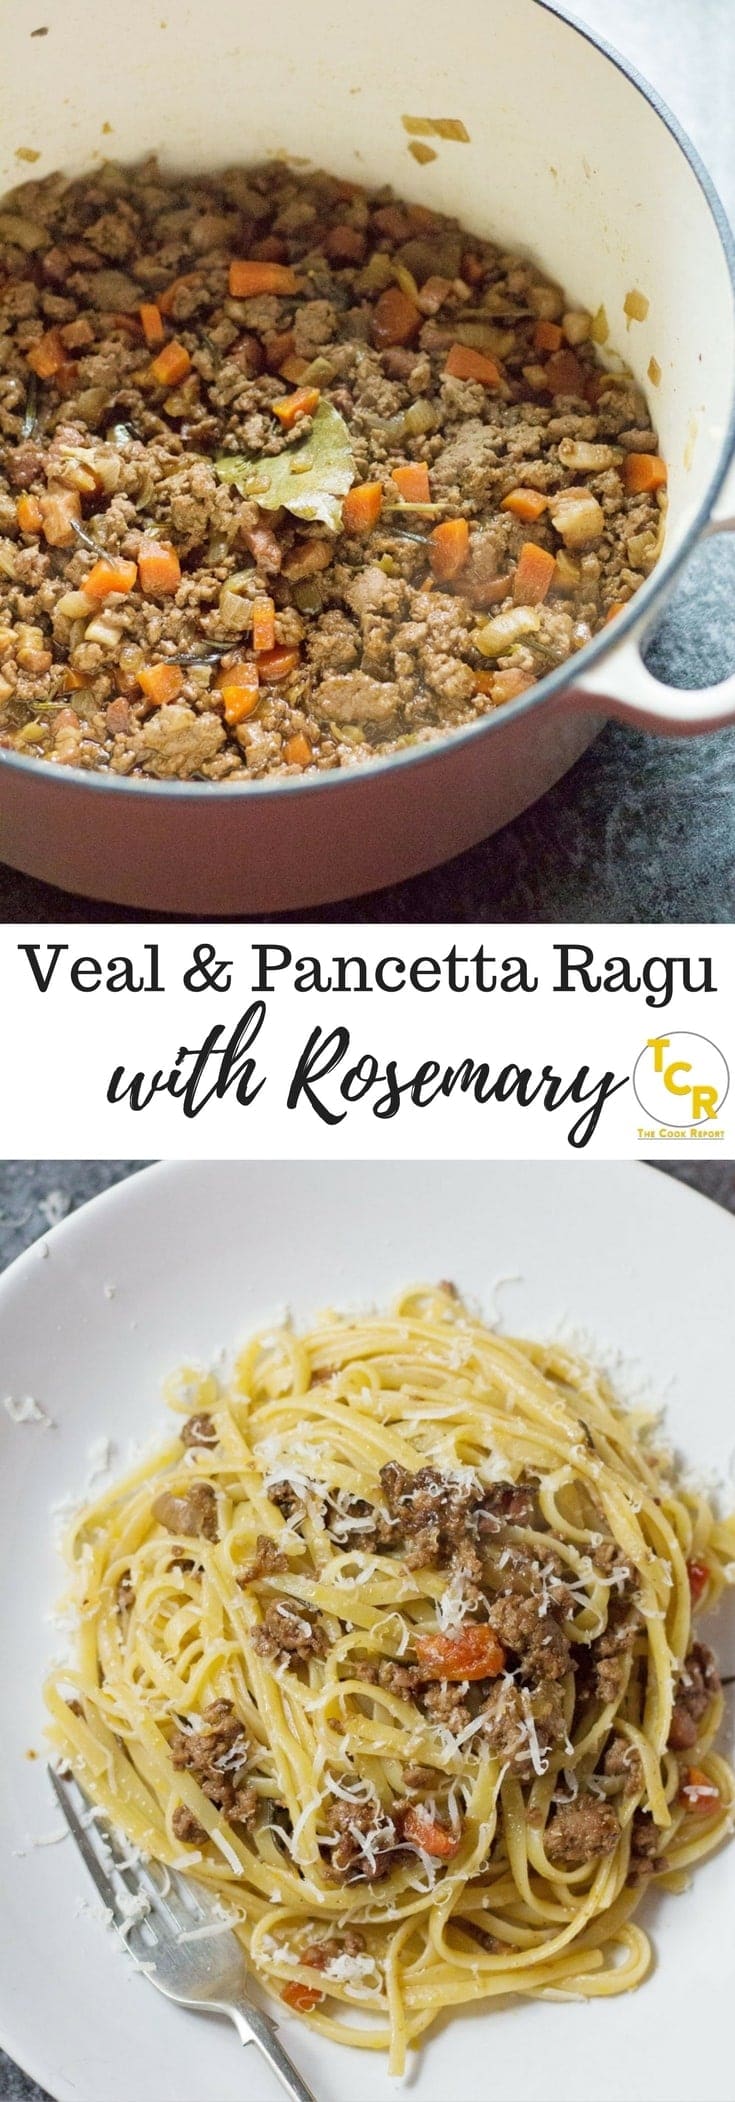 This veal & pancetta ragu is slow cooked for over an hour to get the meat insanely tender. This recipe makes a delicious change from beef.